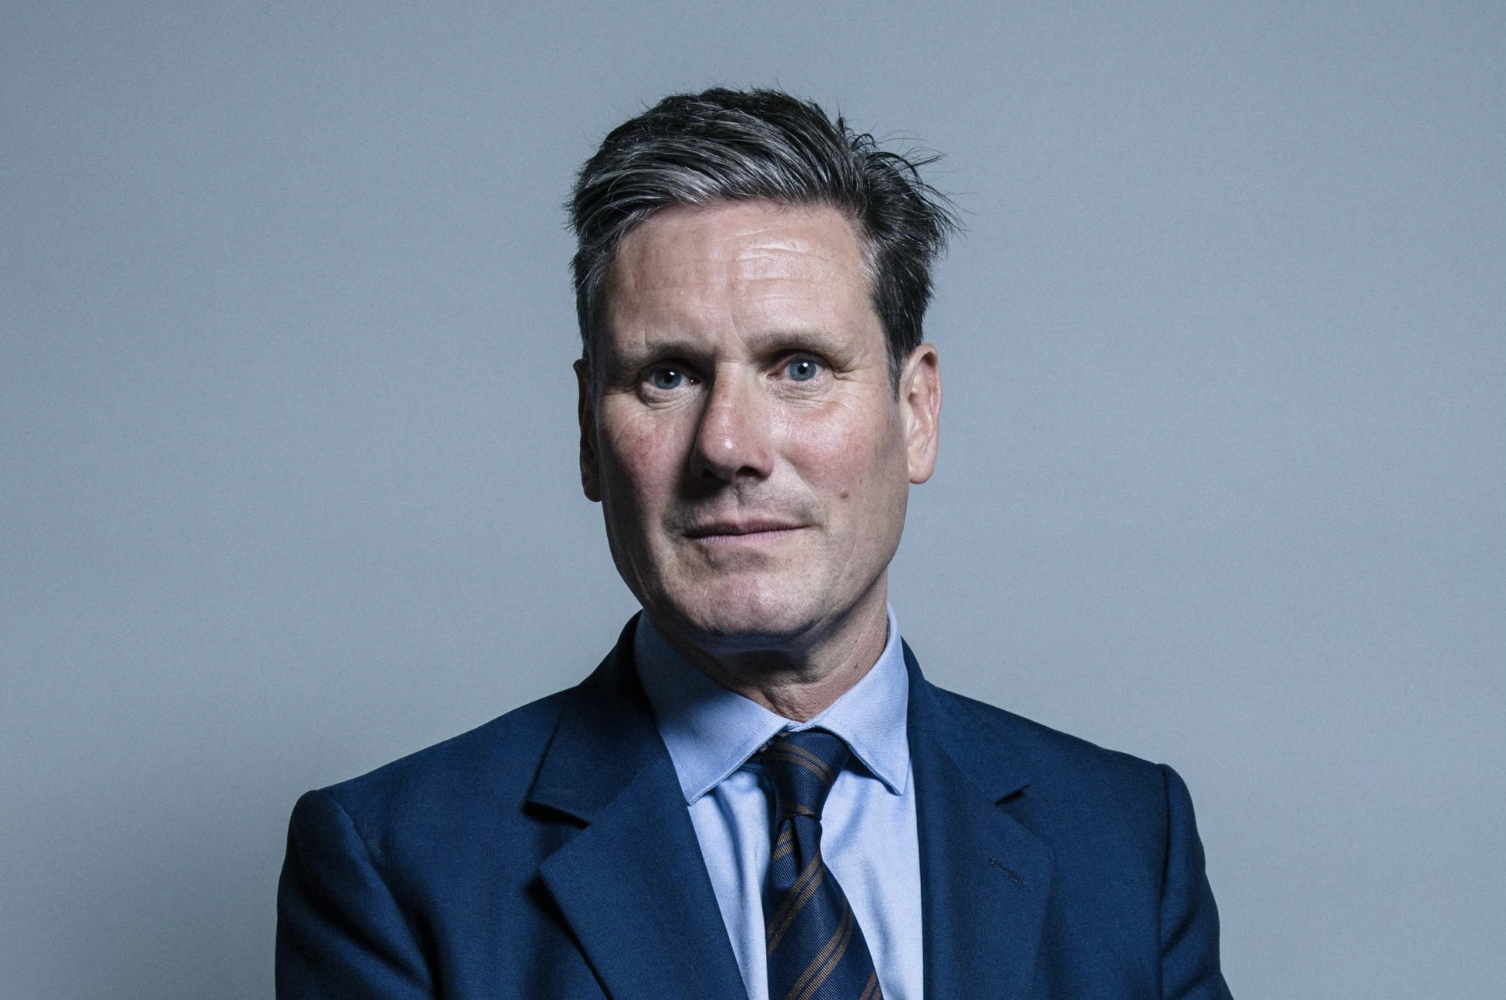 Keir Starmer Calls for Better Treatment for Cleaners at Westminster